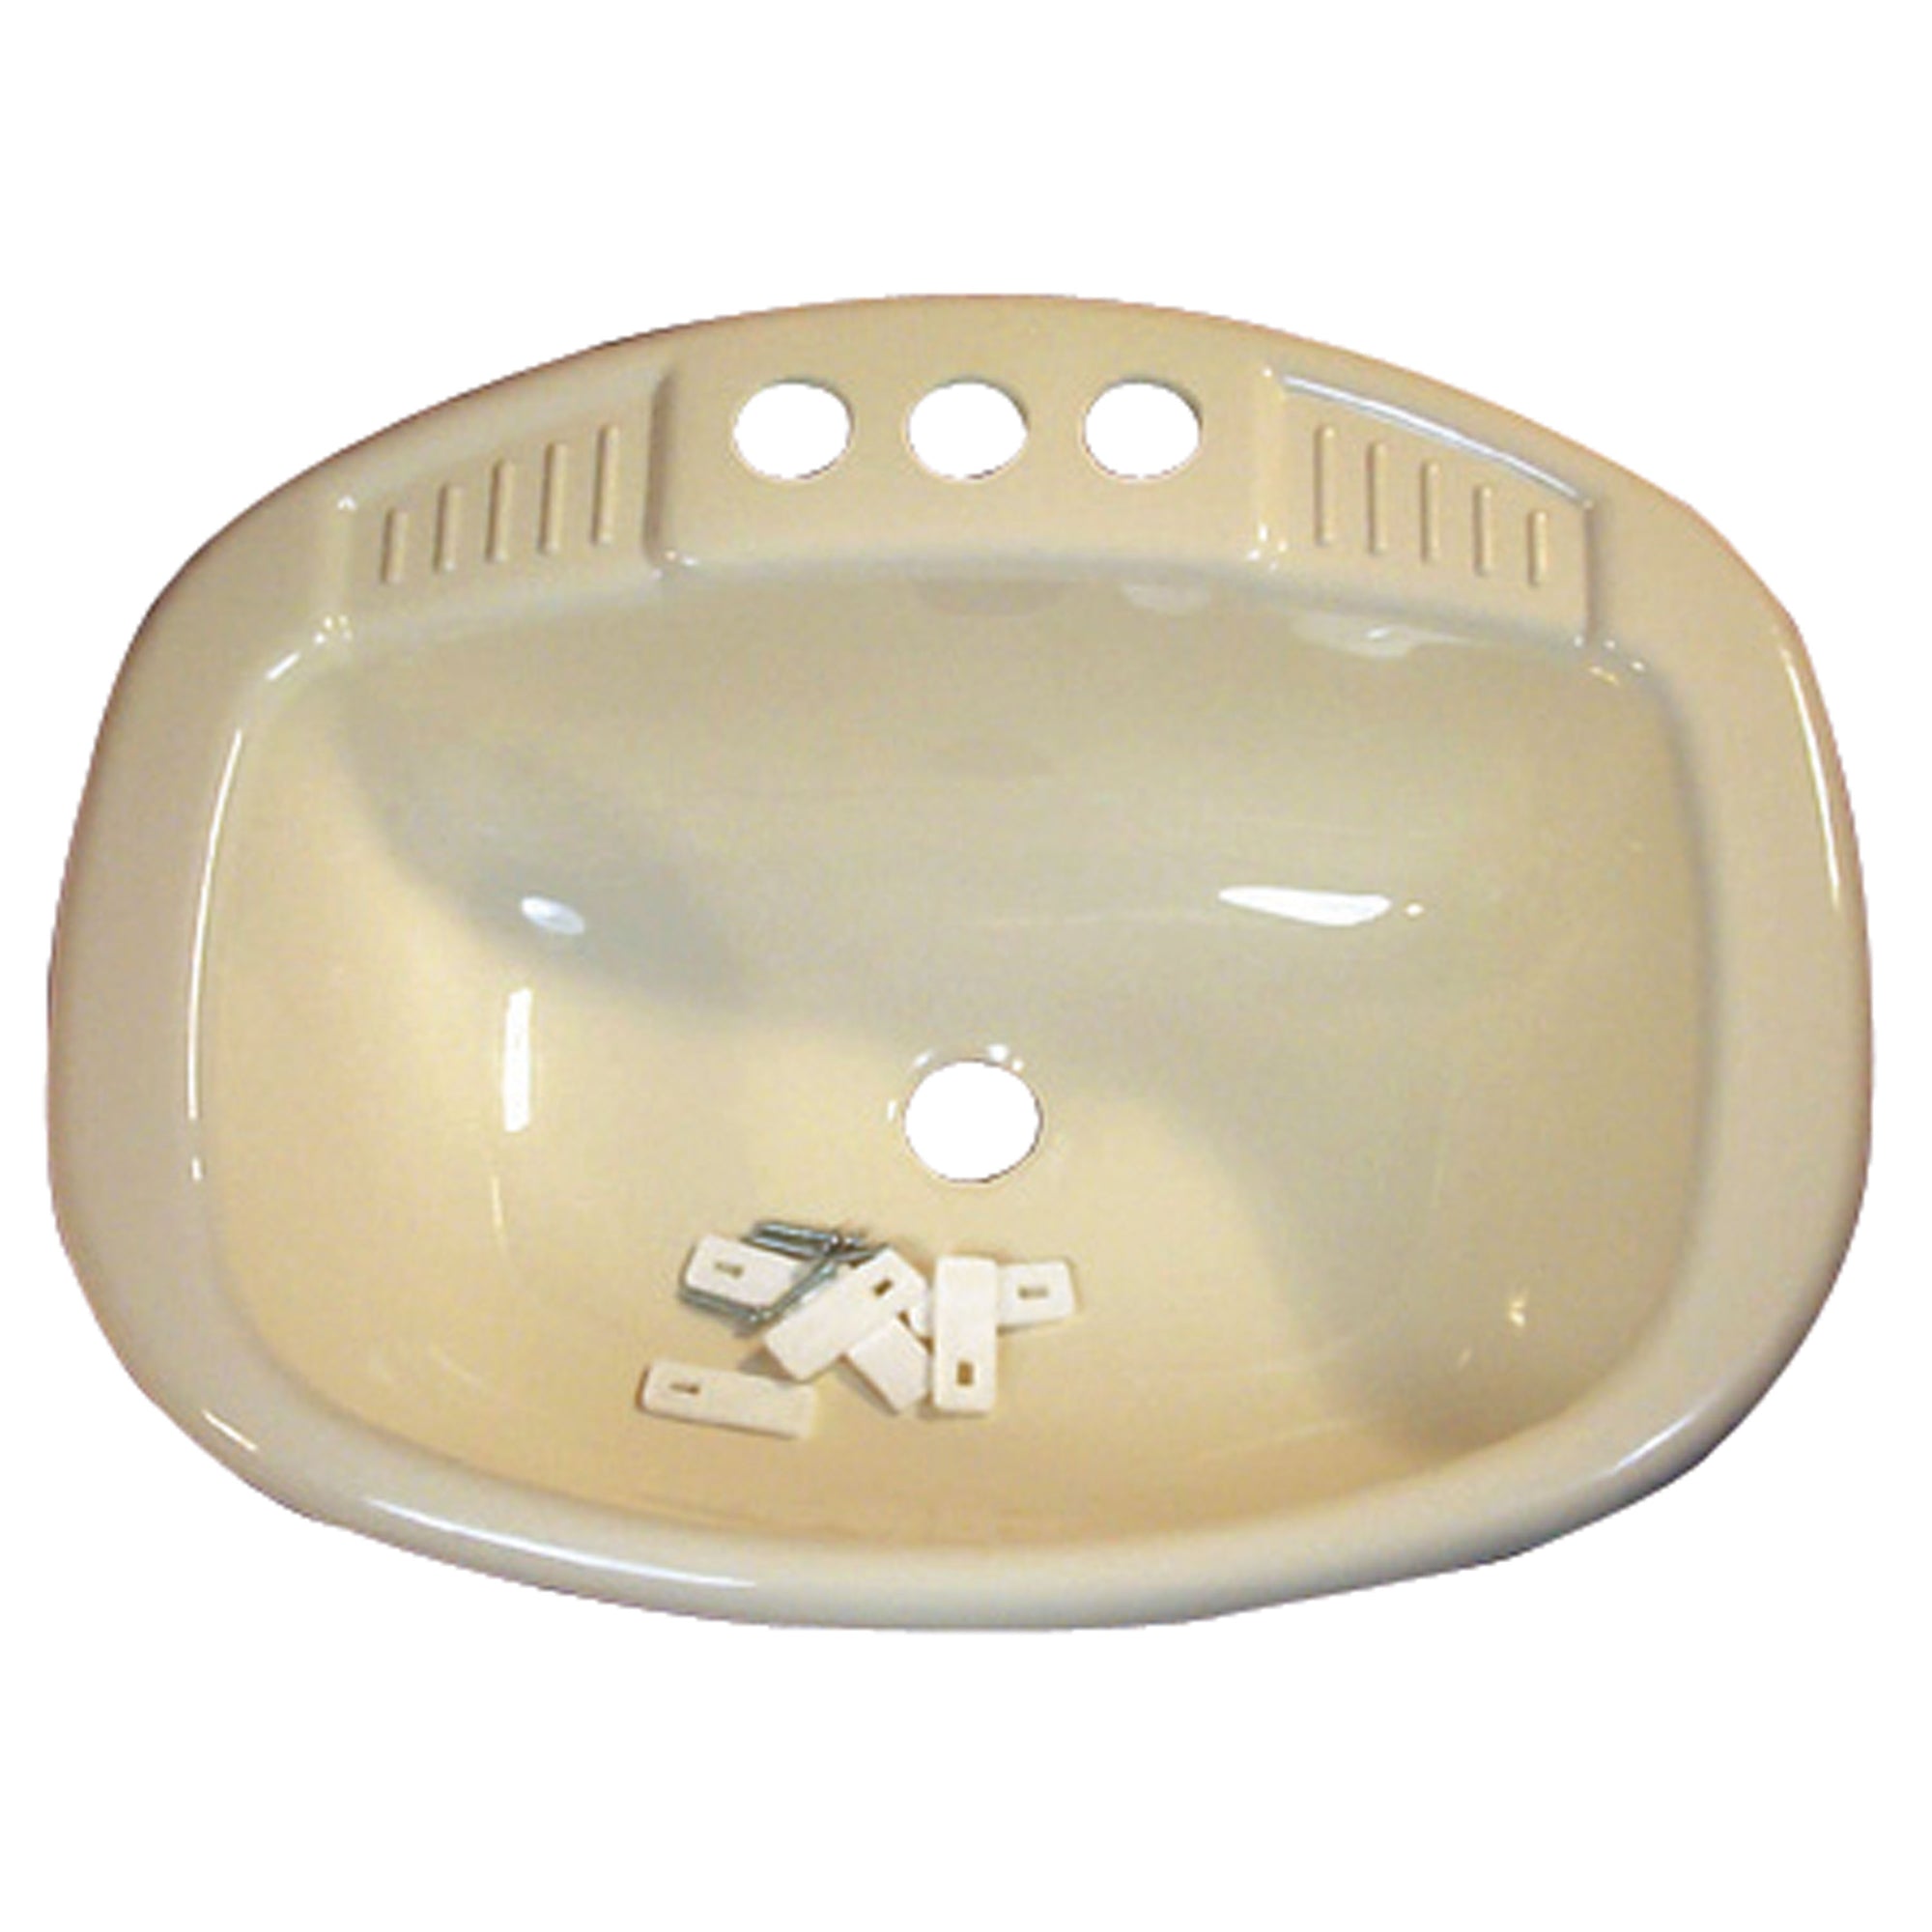 LaSalle Bristol 16 270PP Oval Lavatory Sink With 3 Mounting Holes - Ivory